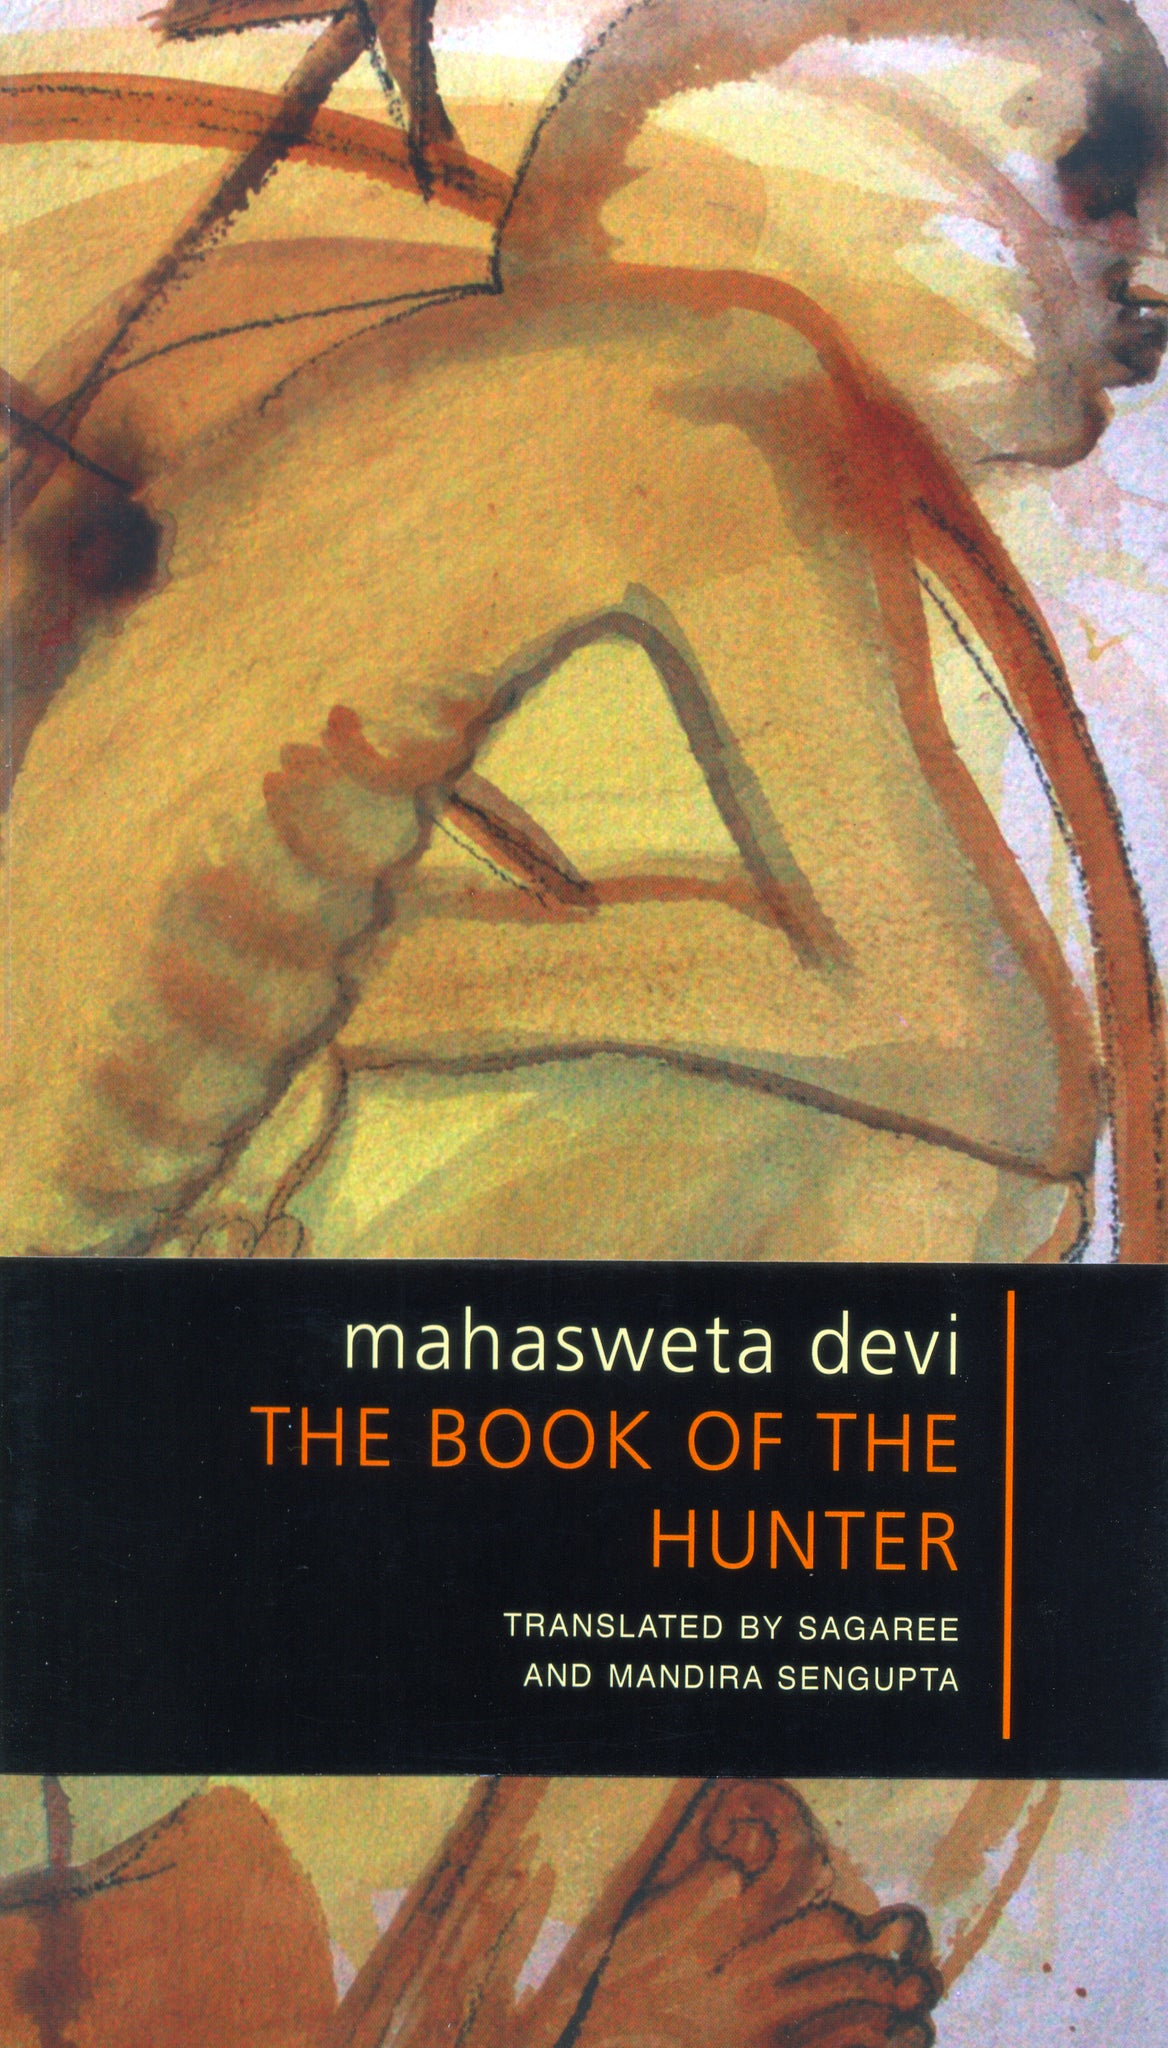 Book of the Hunter